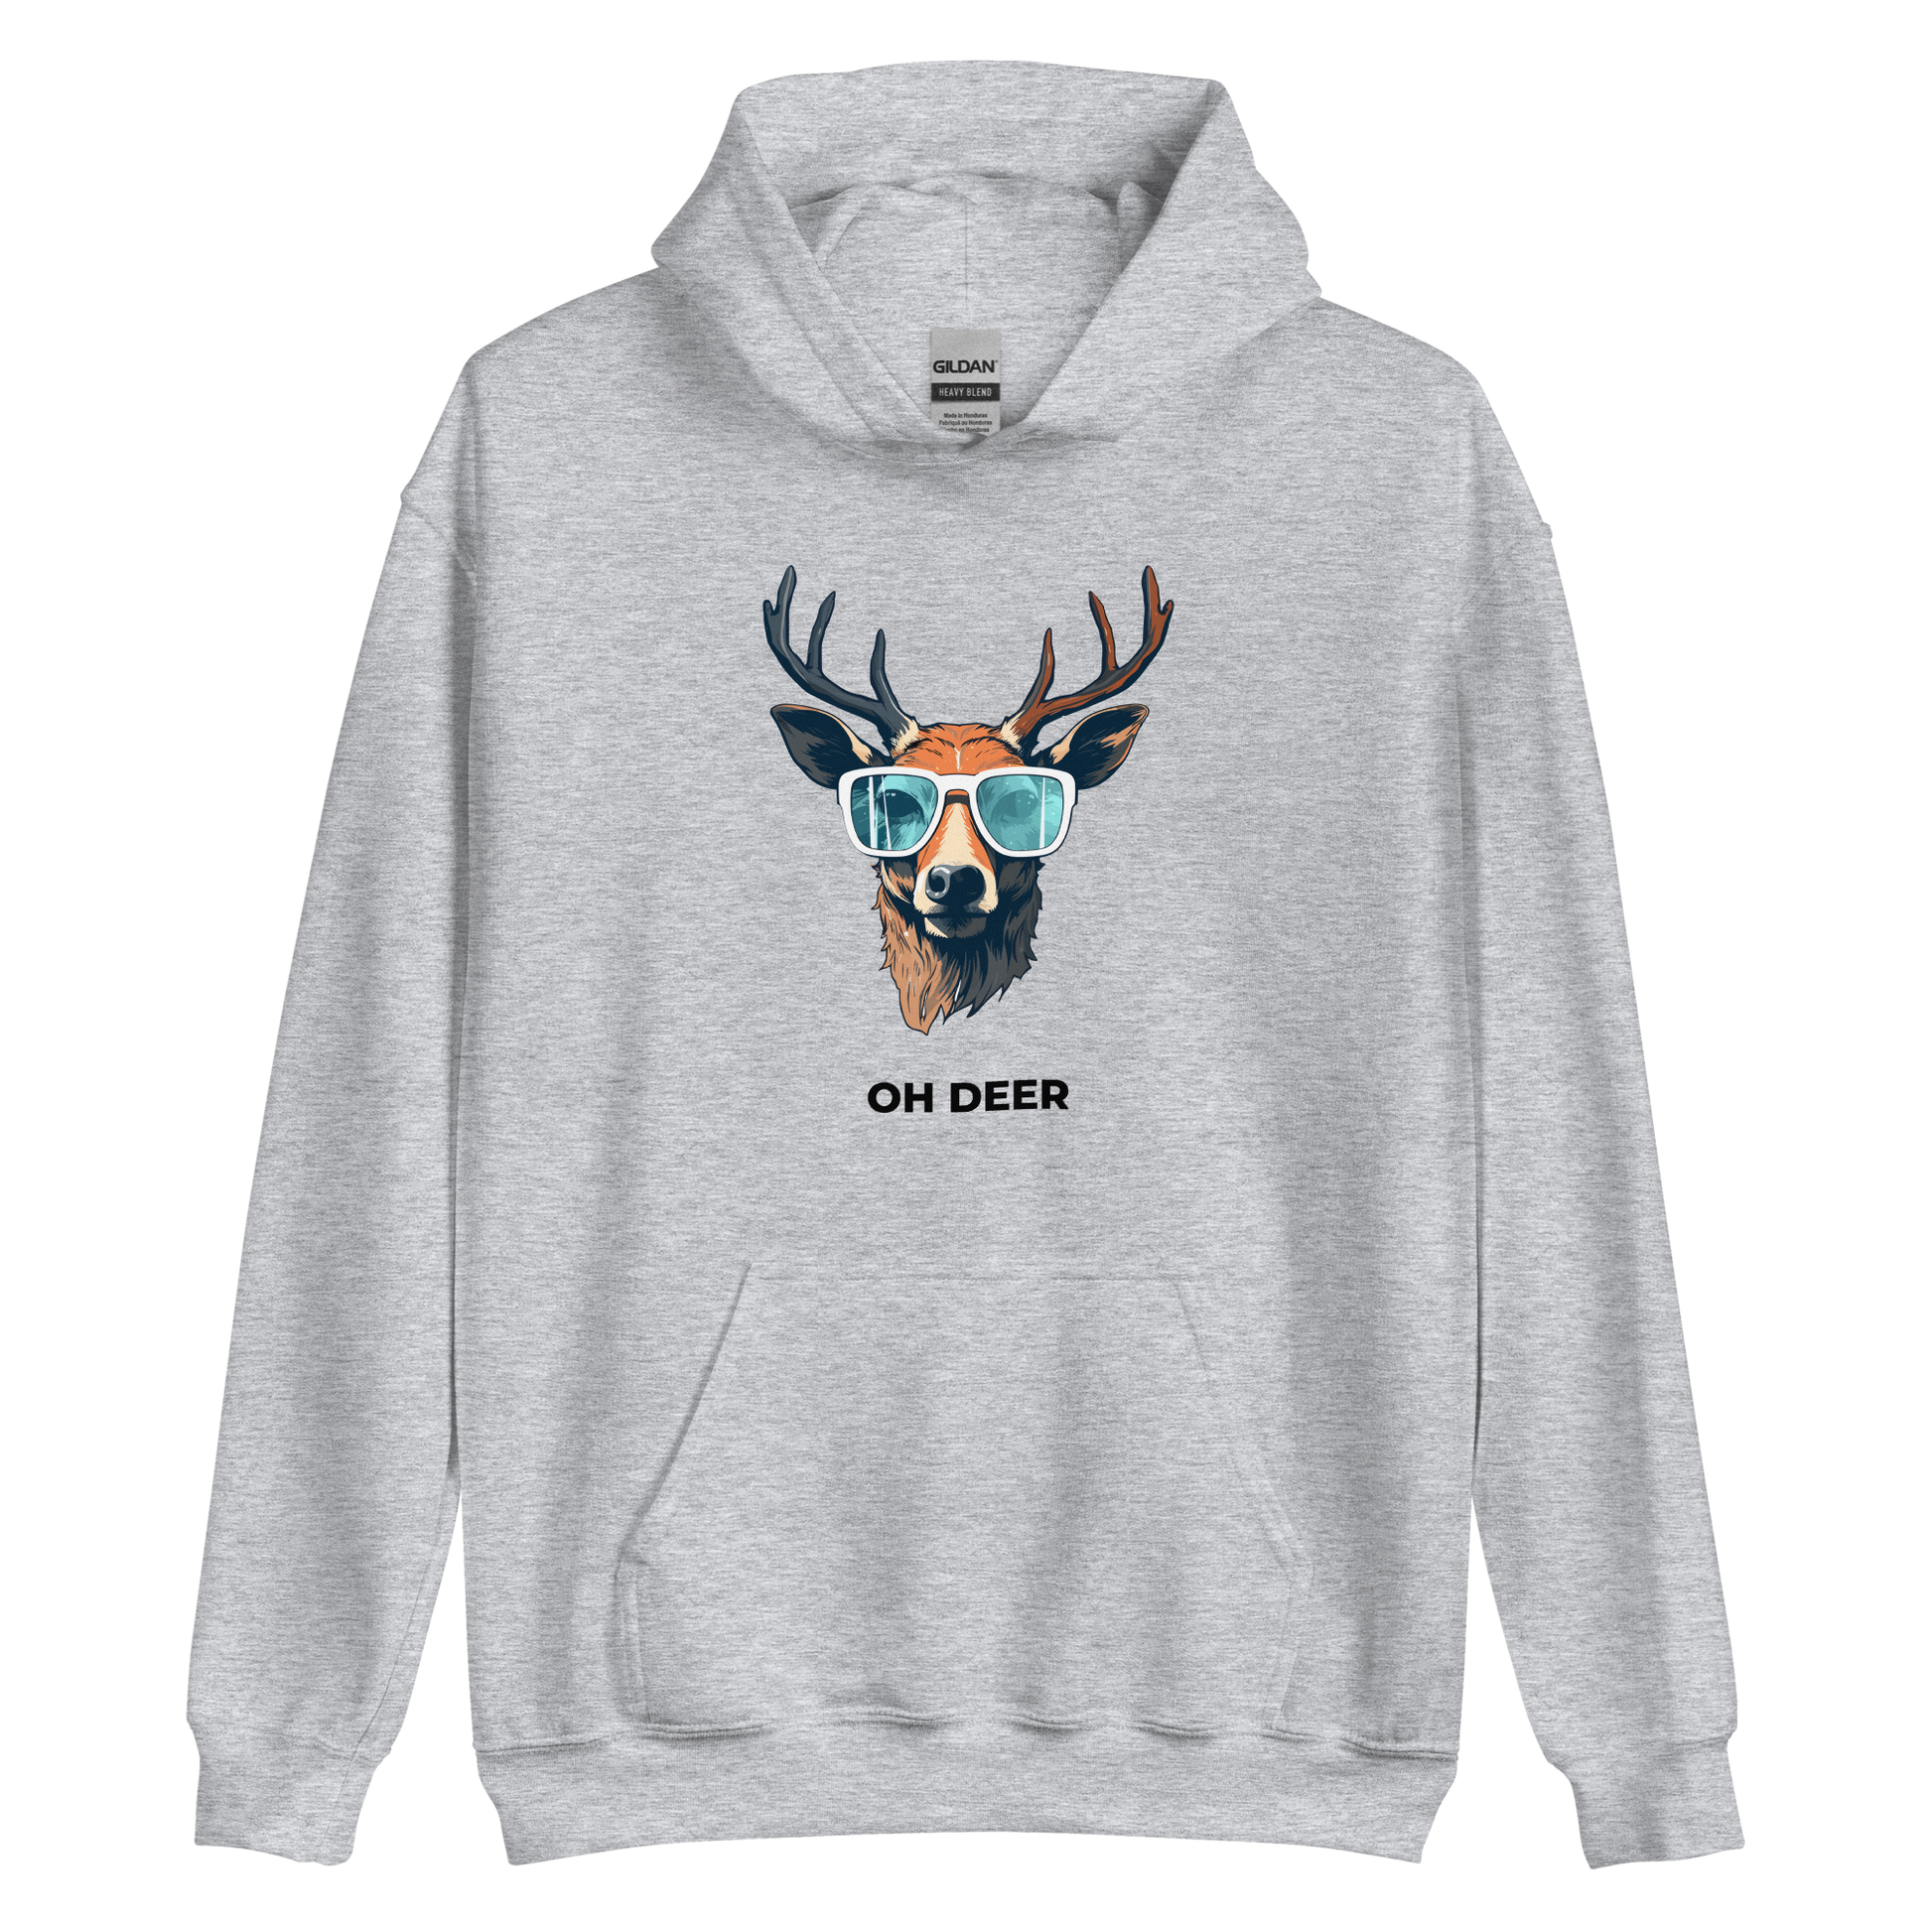 Sport Grey Deer Hoodie featuring a hilarious Oh Deer graphic on the chest - Funny Graphic Deer Hoodies - Boozy Fox